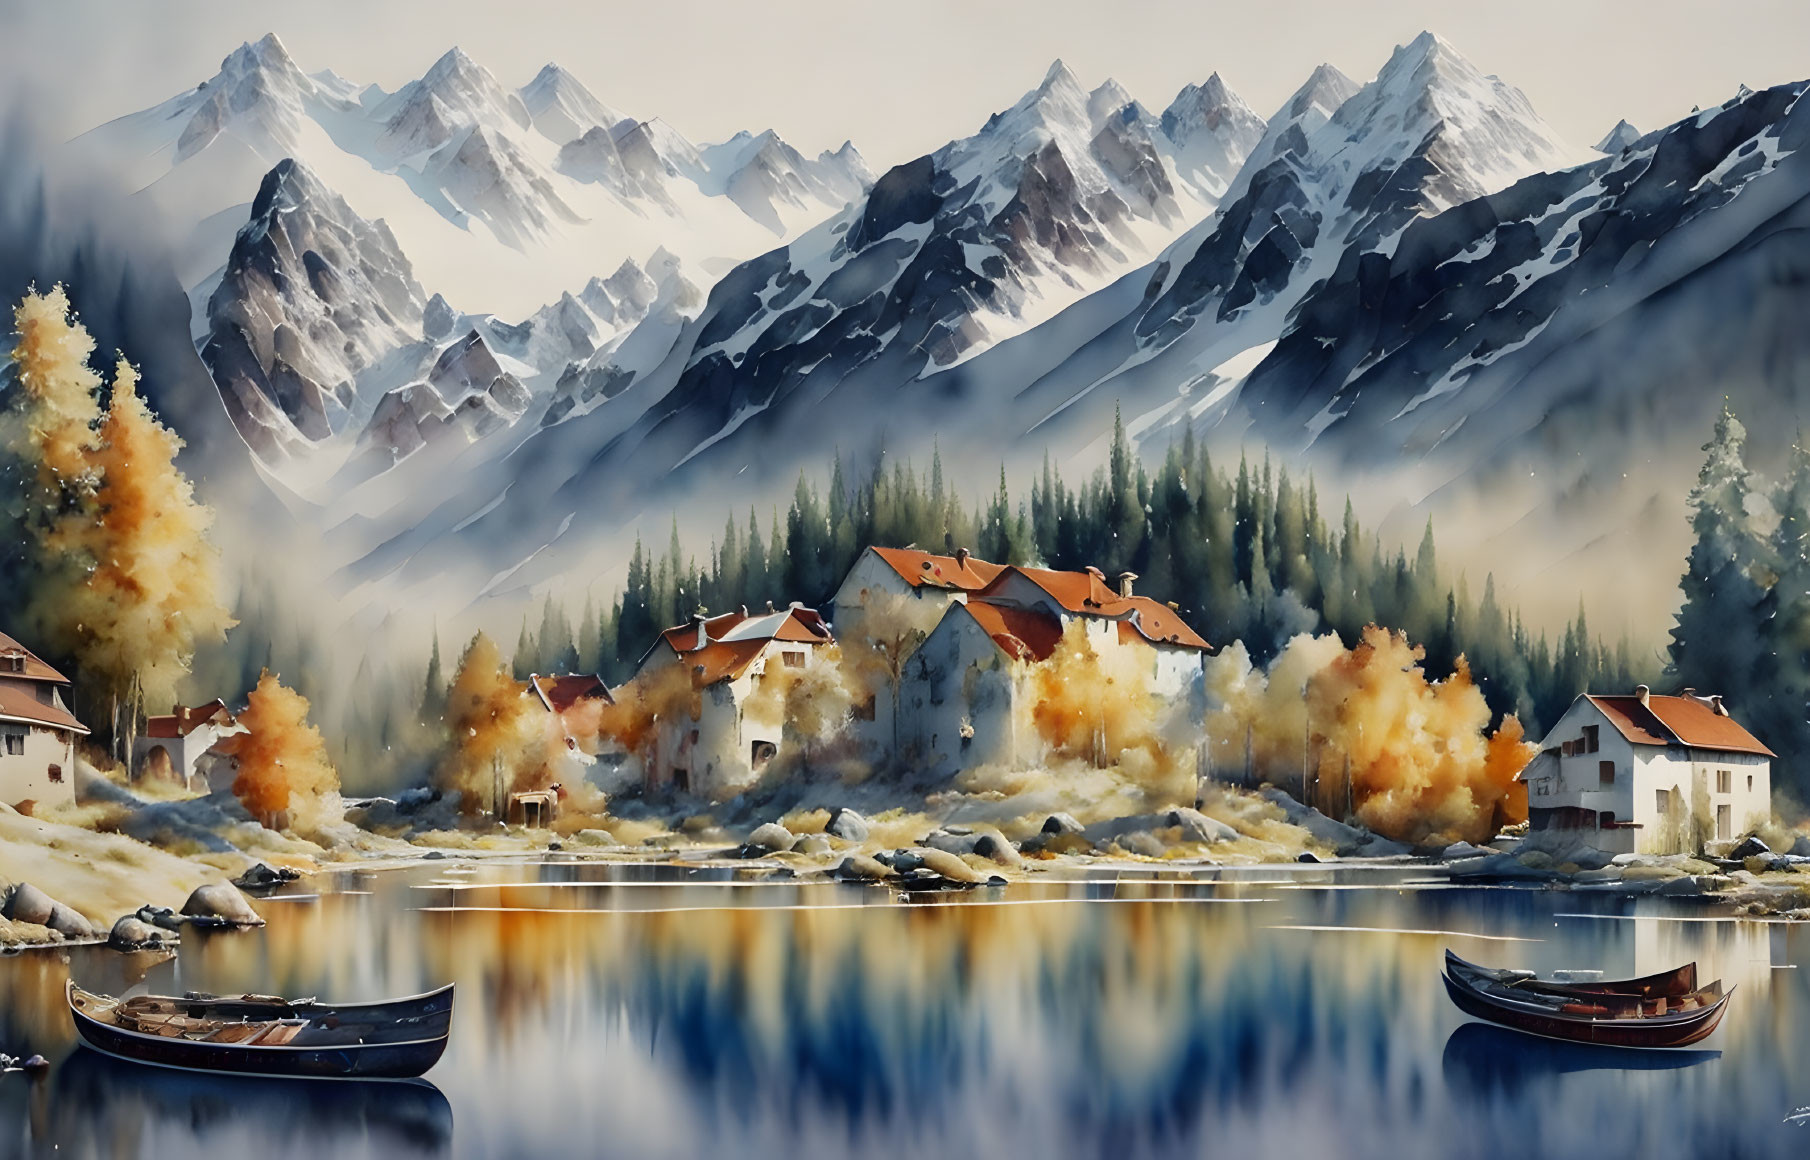 Autumn mountain village by lake with golden trees and snow-capped peaks